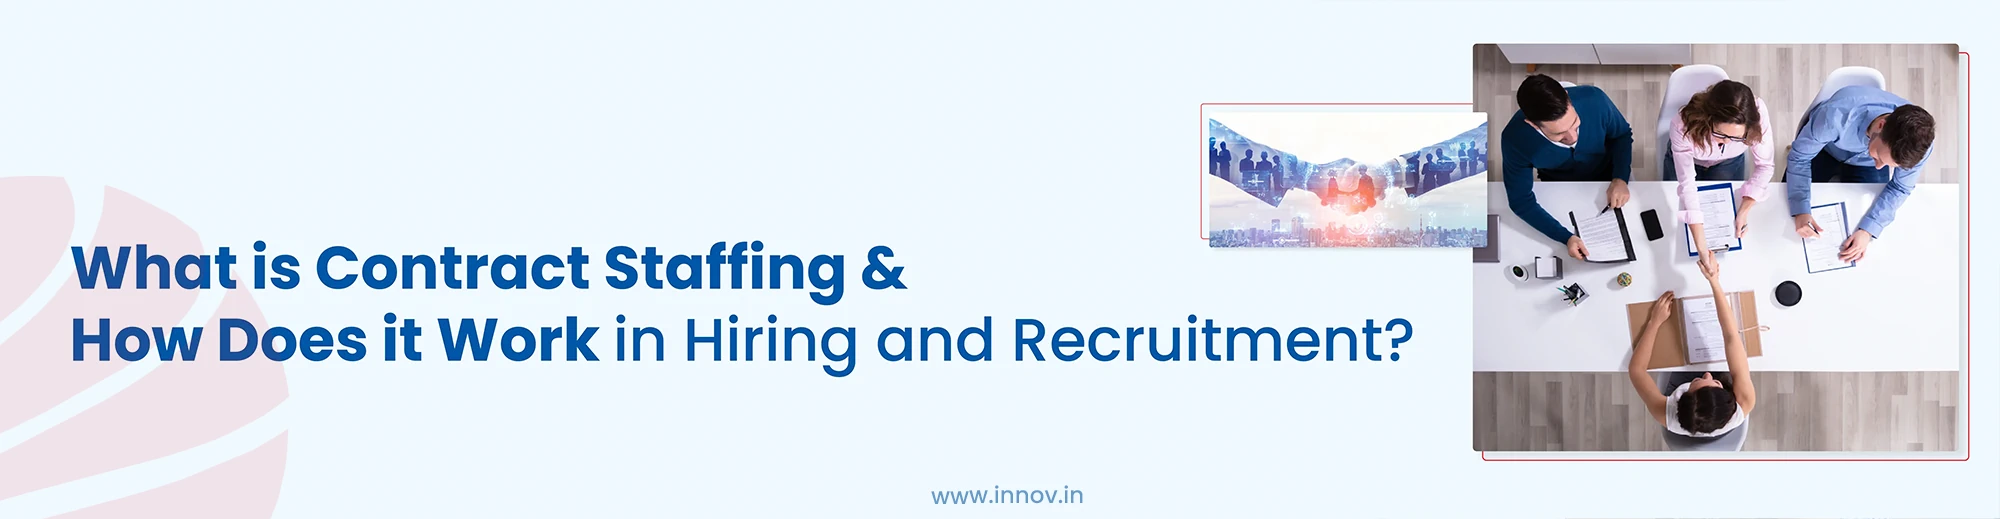 What is Contract Staffing in Recruitment & Its Benefits?